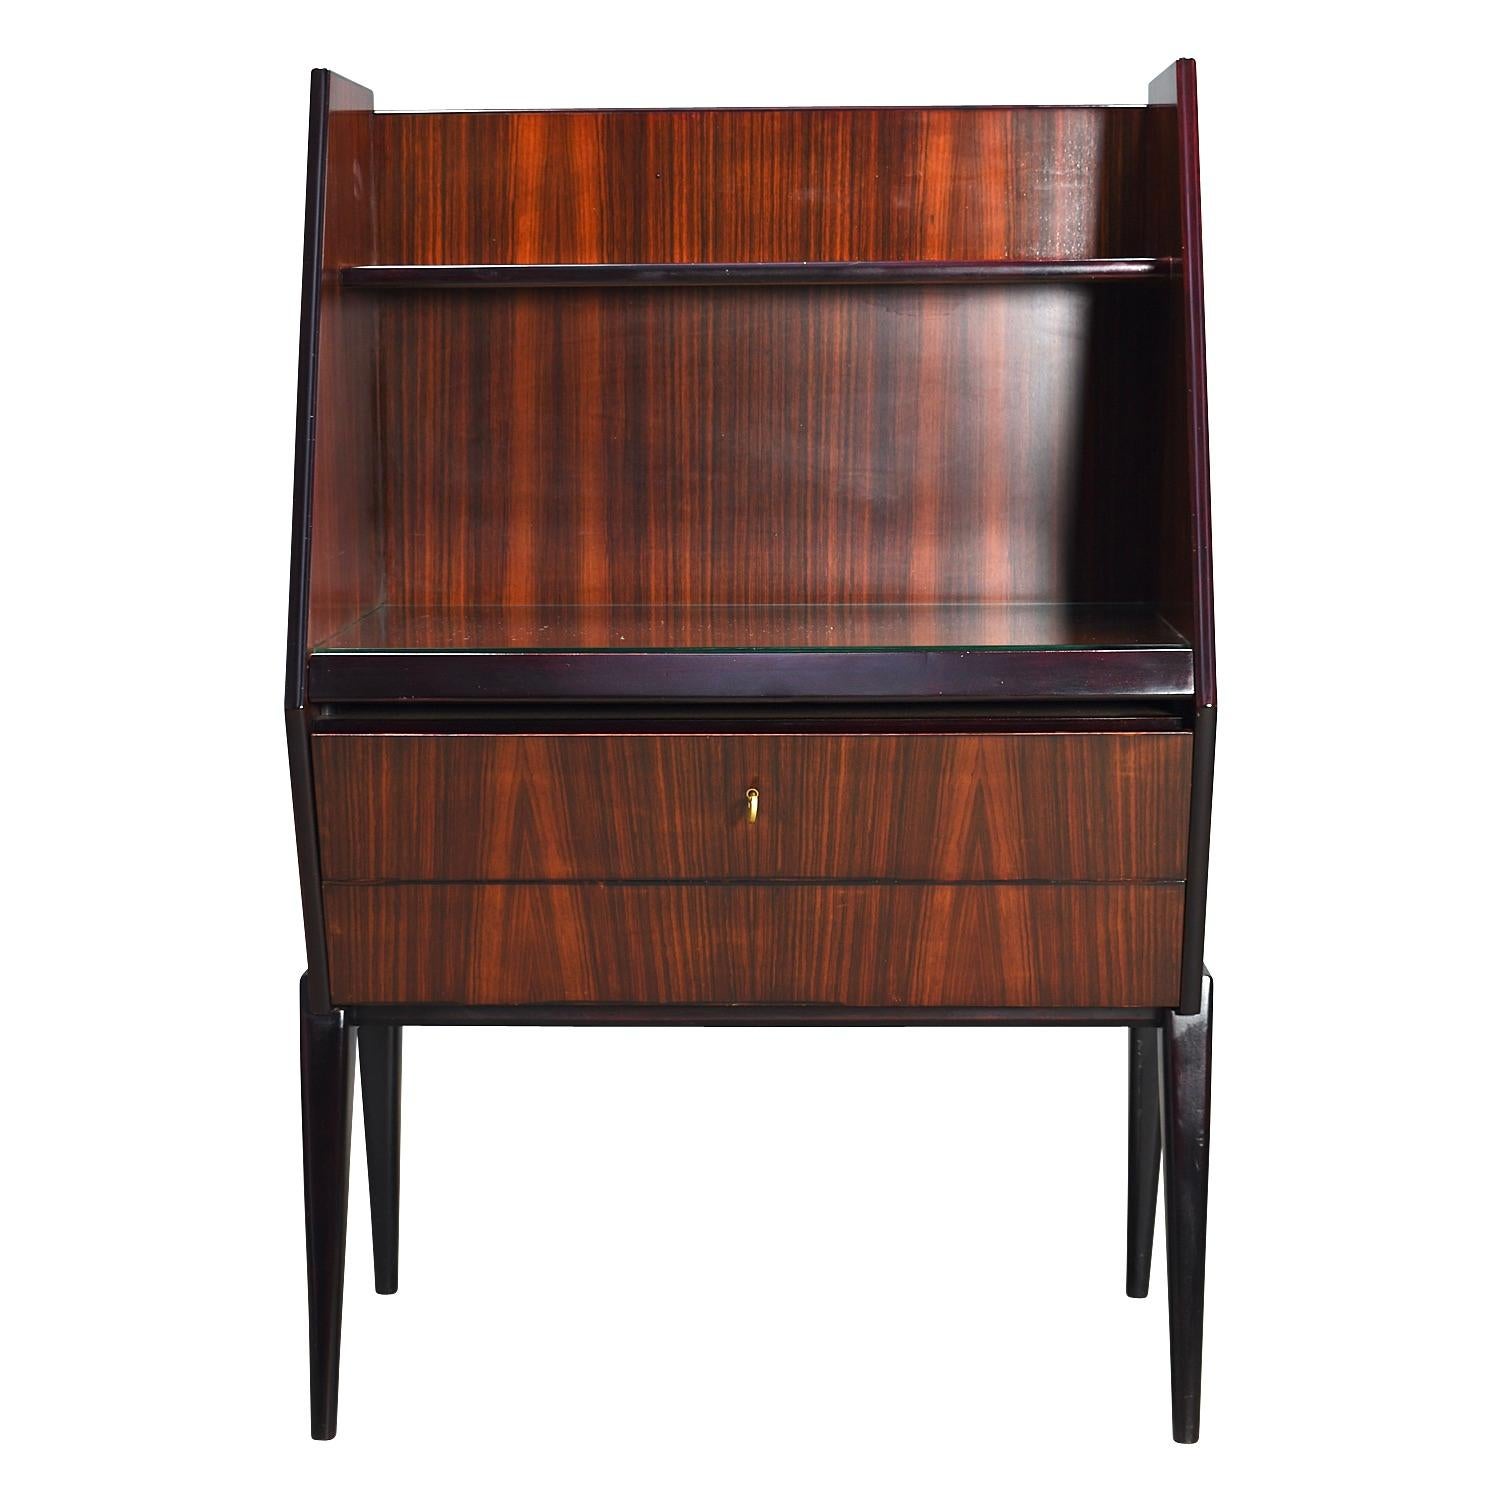 Italian midcentury writing desk / secretaire in Italian cherry. It has an extractable writing leaf.

Designer: Stabilimenti Napoli

Manufacturer: Antonino Gorgone

Country: Italy

Model: writing desk

Design period: 1950s-1960s

Date of